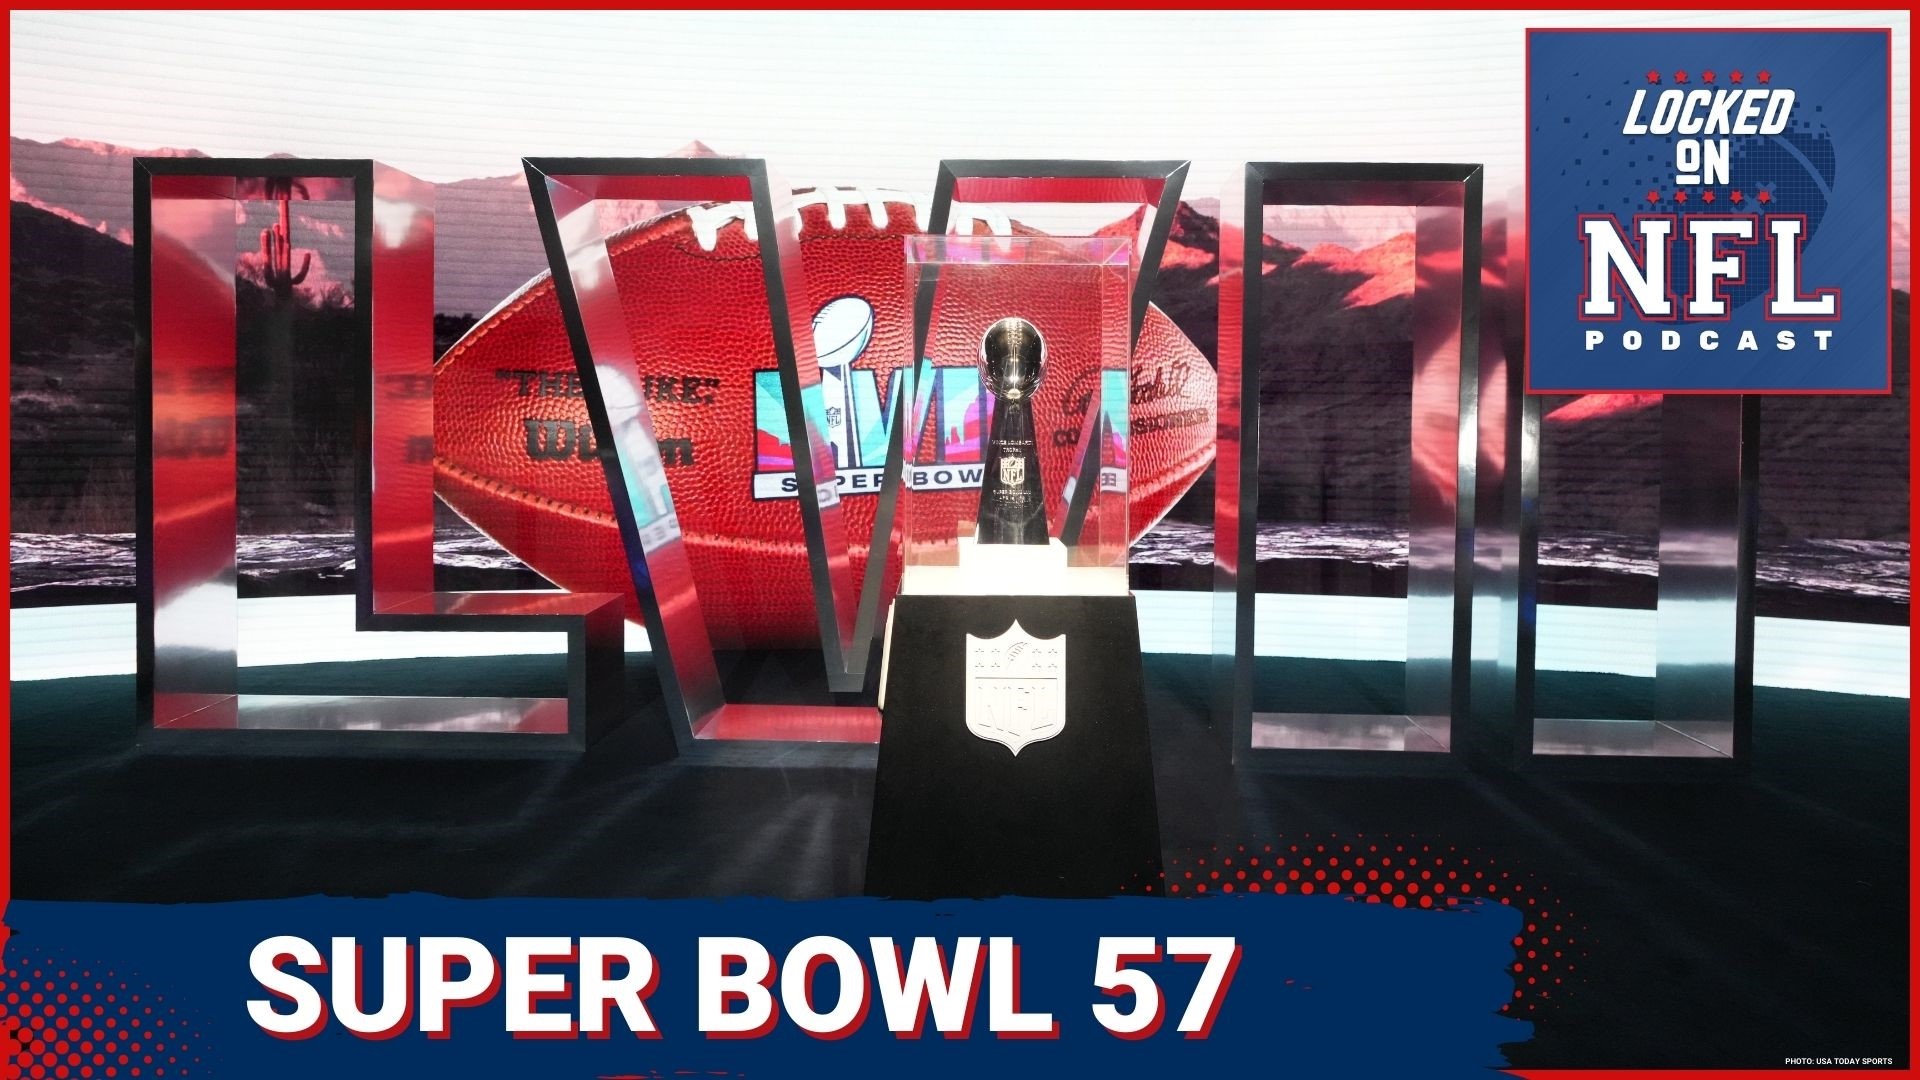 Ahead of Super Bowl LVII, hear experts picks for who will come out on top between the Eagles and the Chiefs.